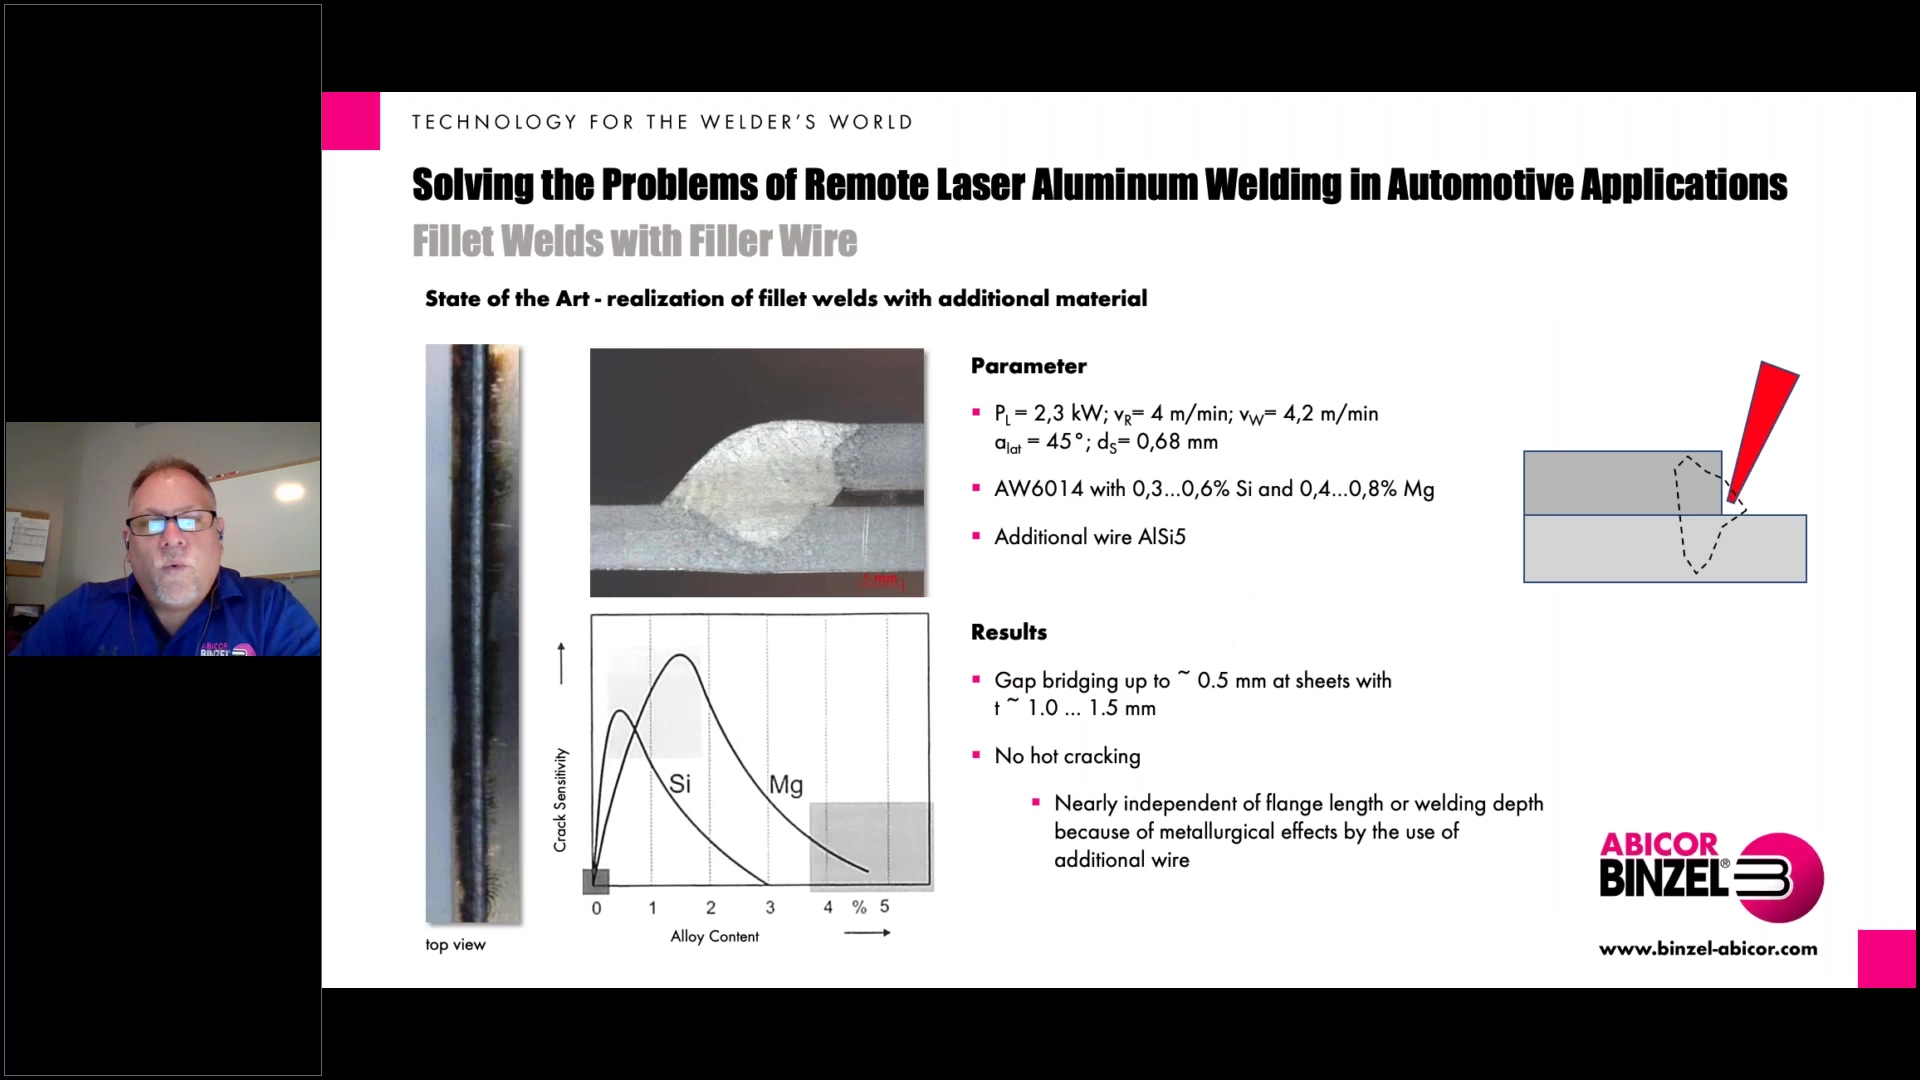 Solving the Problems of Remote Laser Aluminum Welding in Automotive Applications